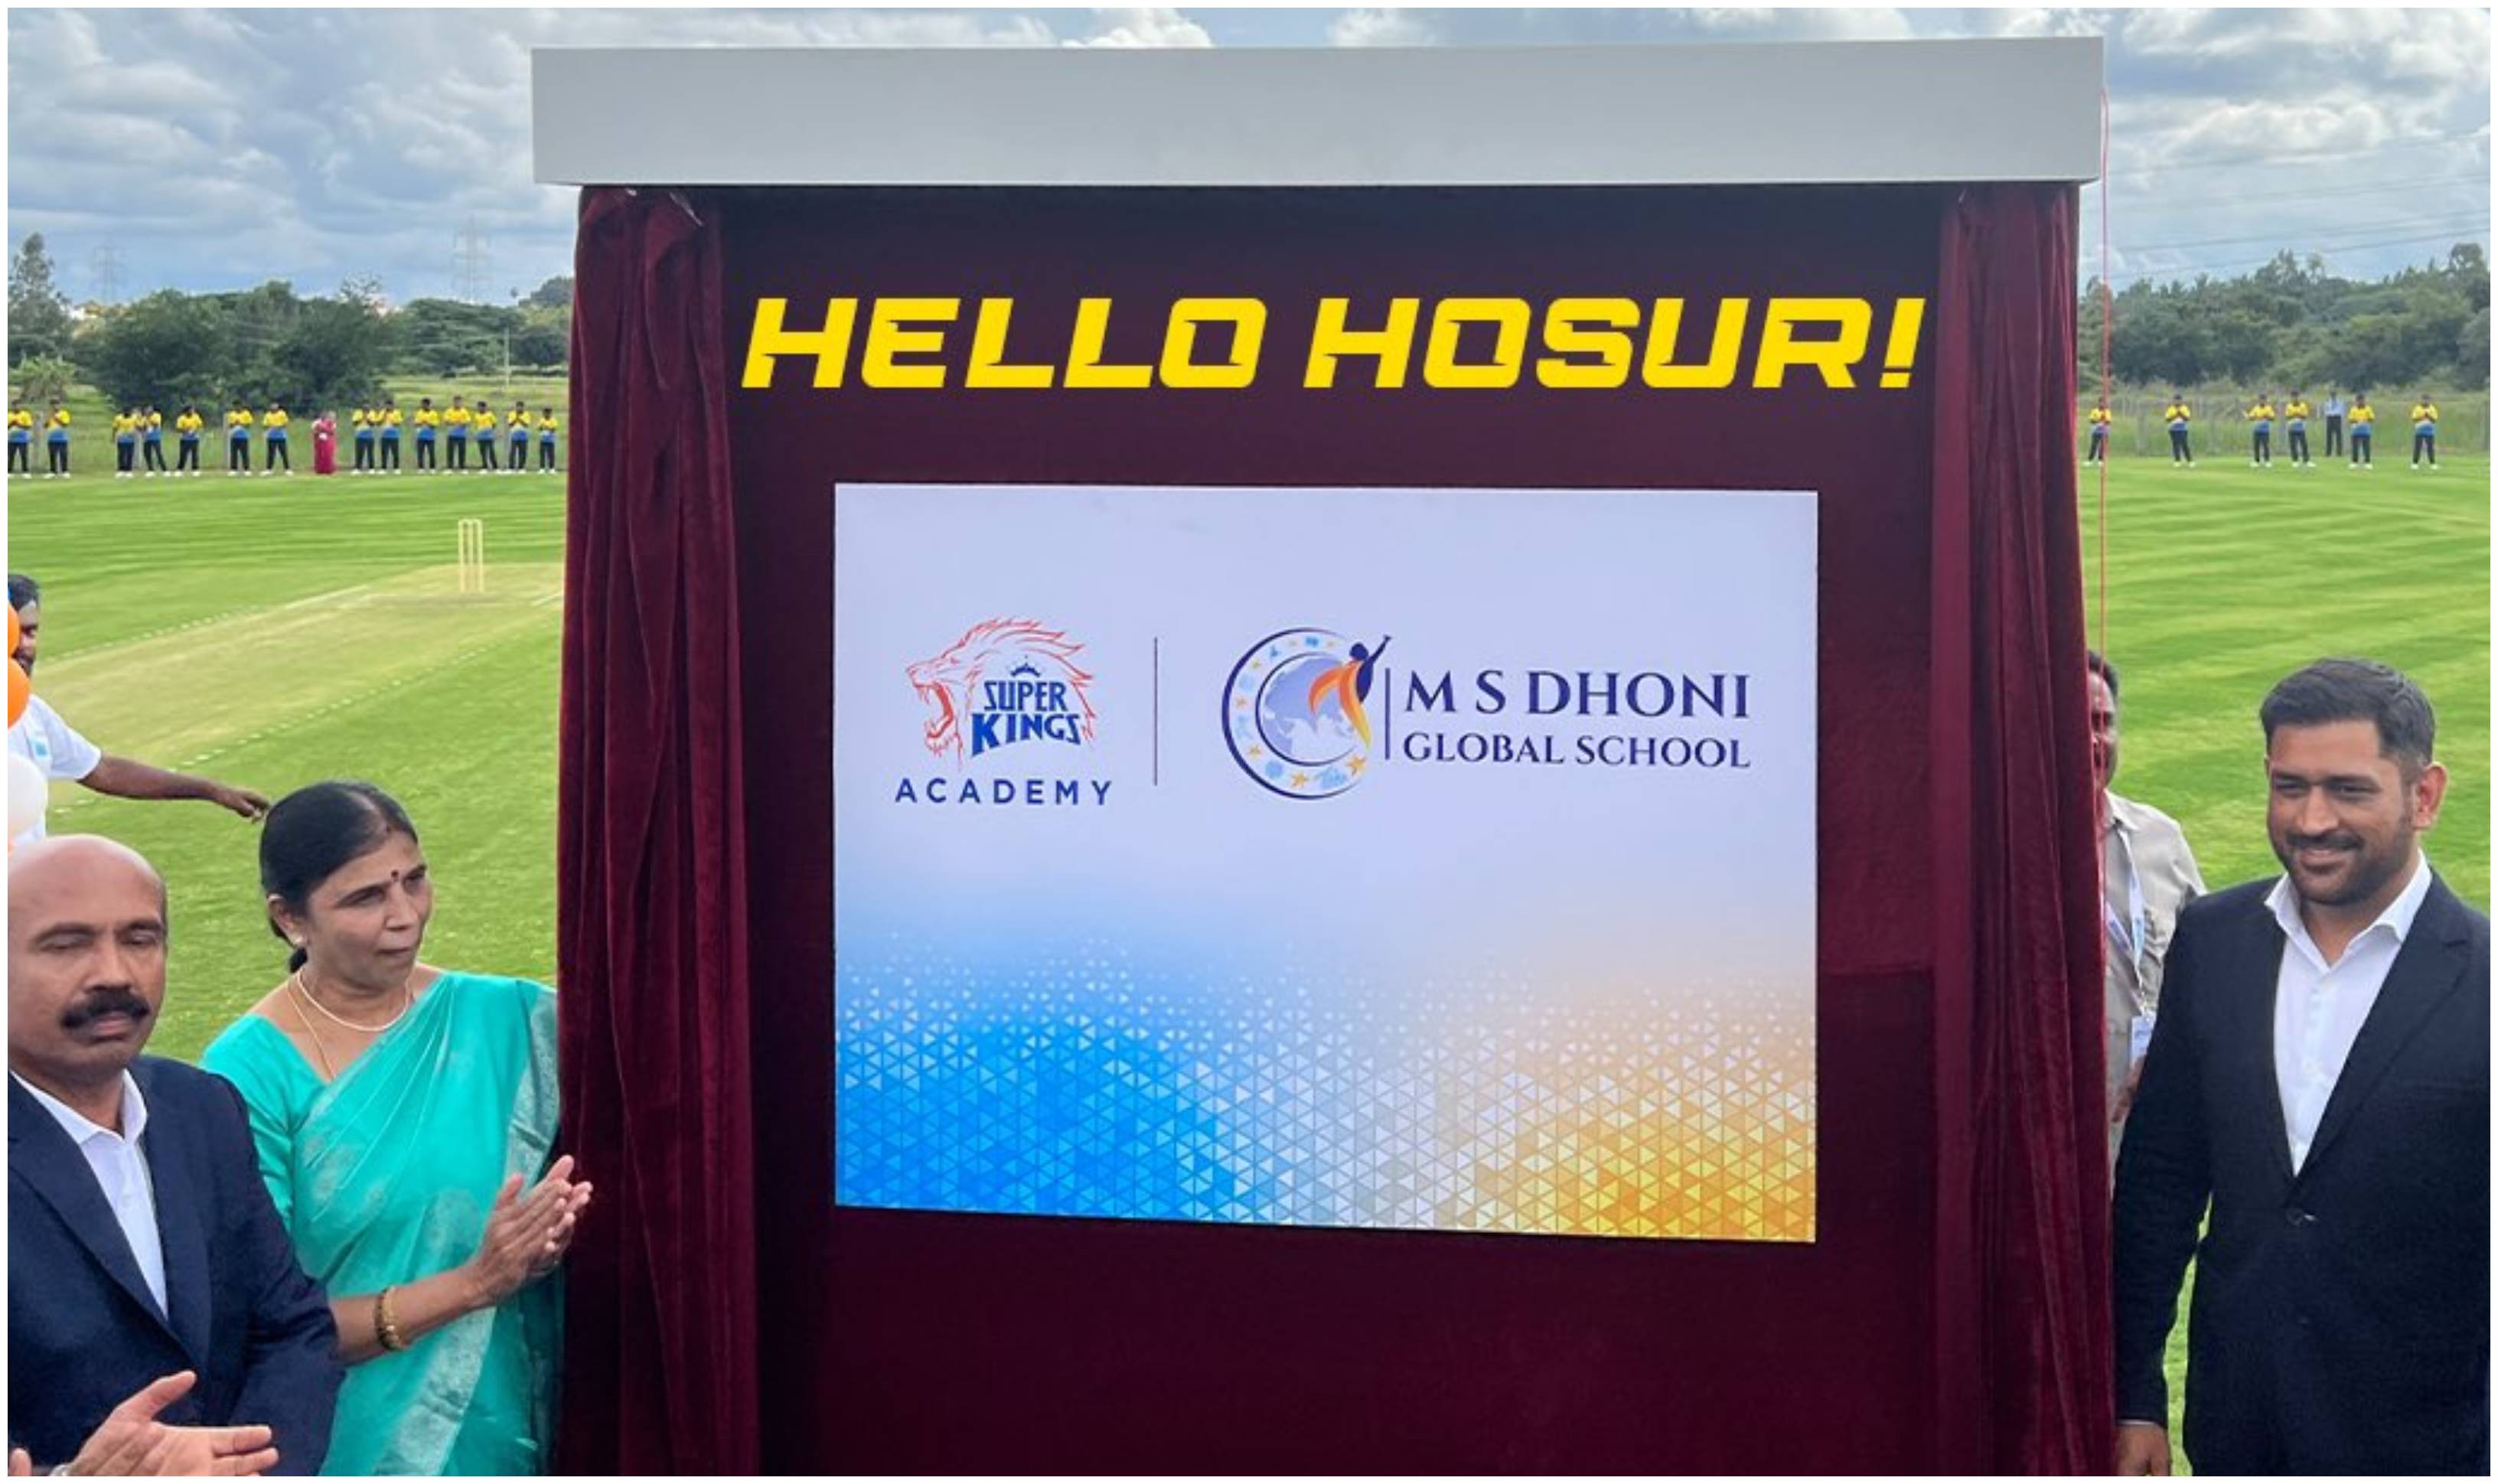 MS Dhoni inaugurated the Super Kings Academy | @SuperKingsacademy/Twitter